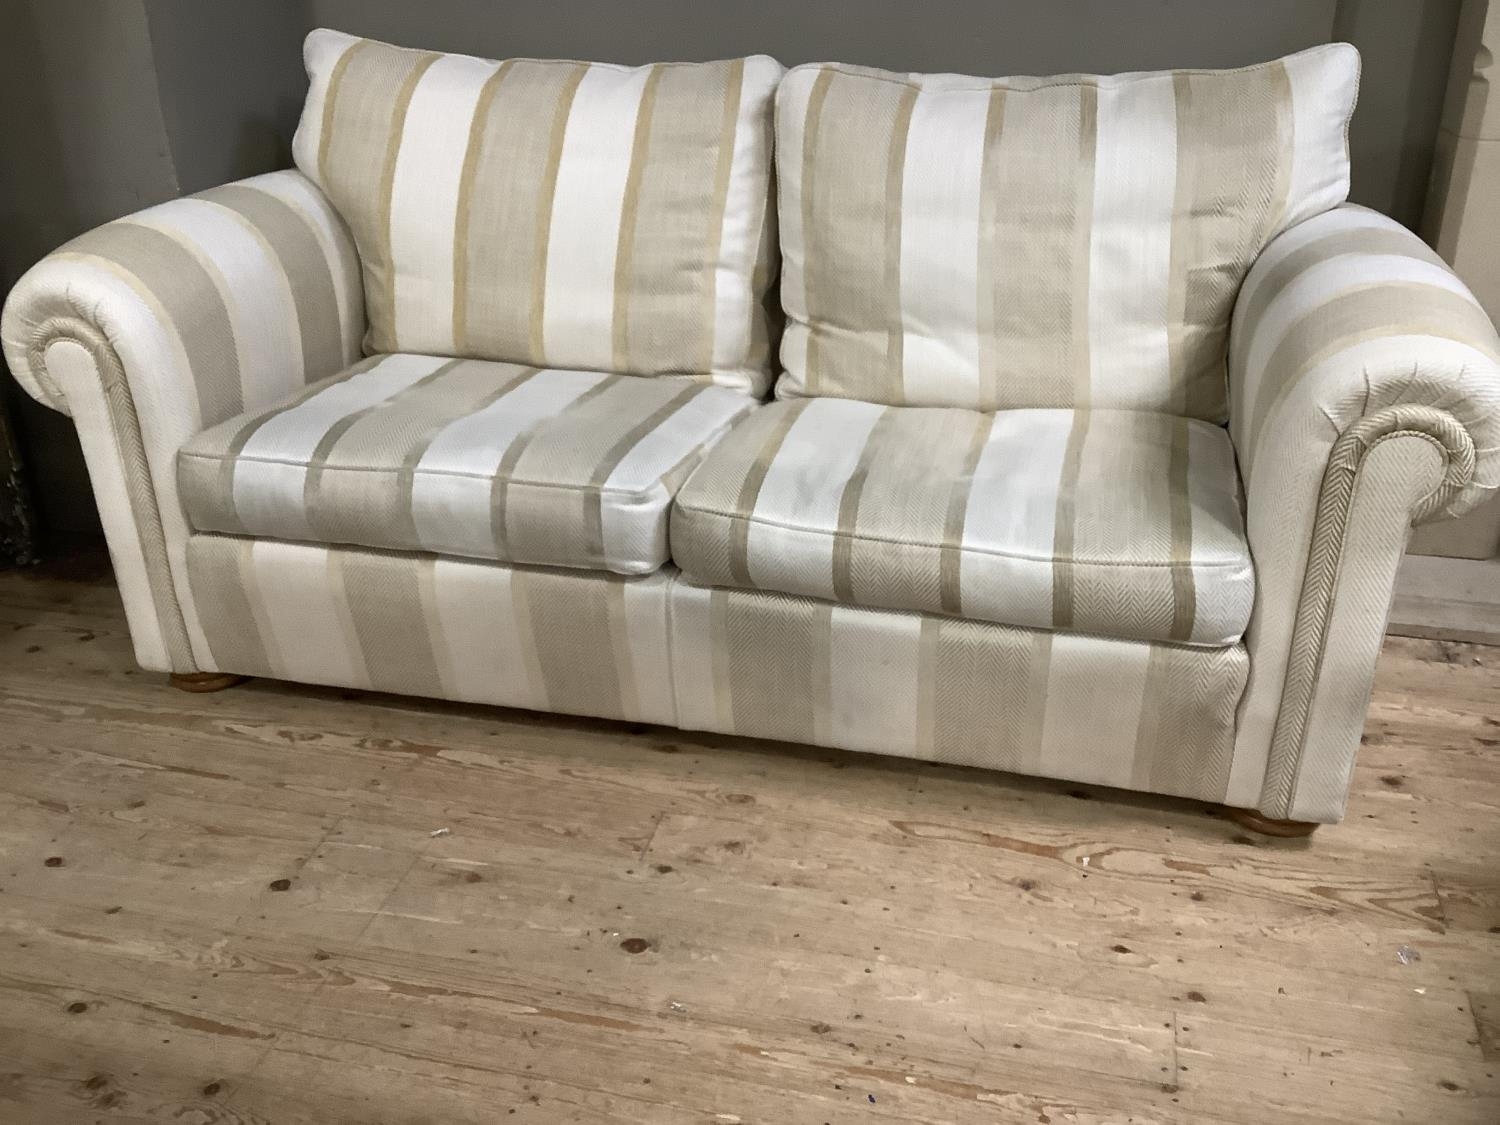 A Duresta three seater sofa upholstered in ecru and cream herringbone fabric together with two - Image 9 of 12